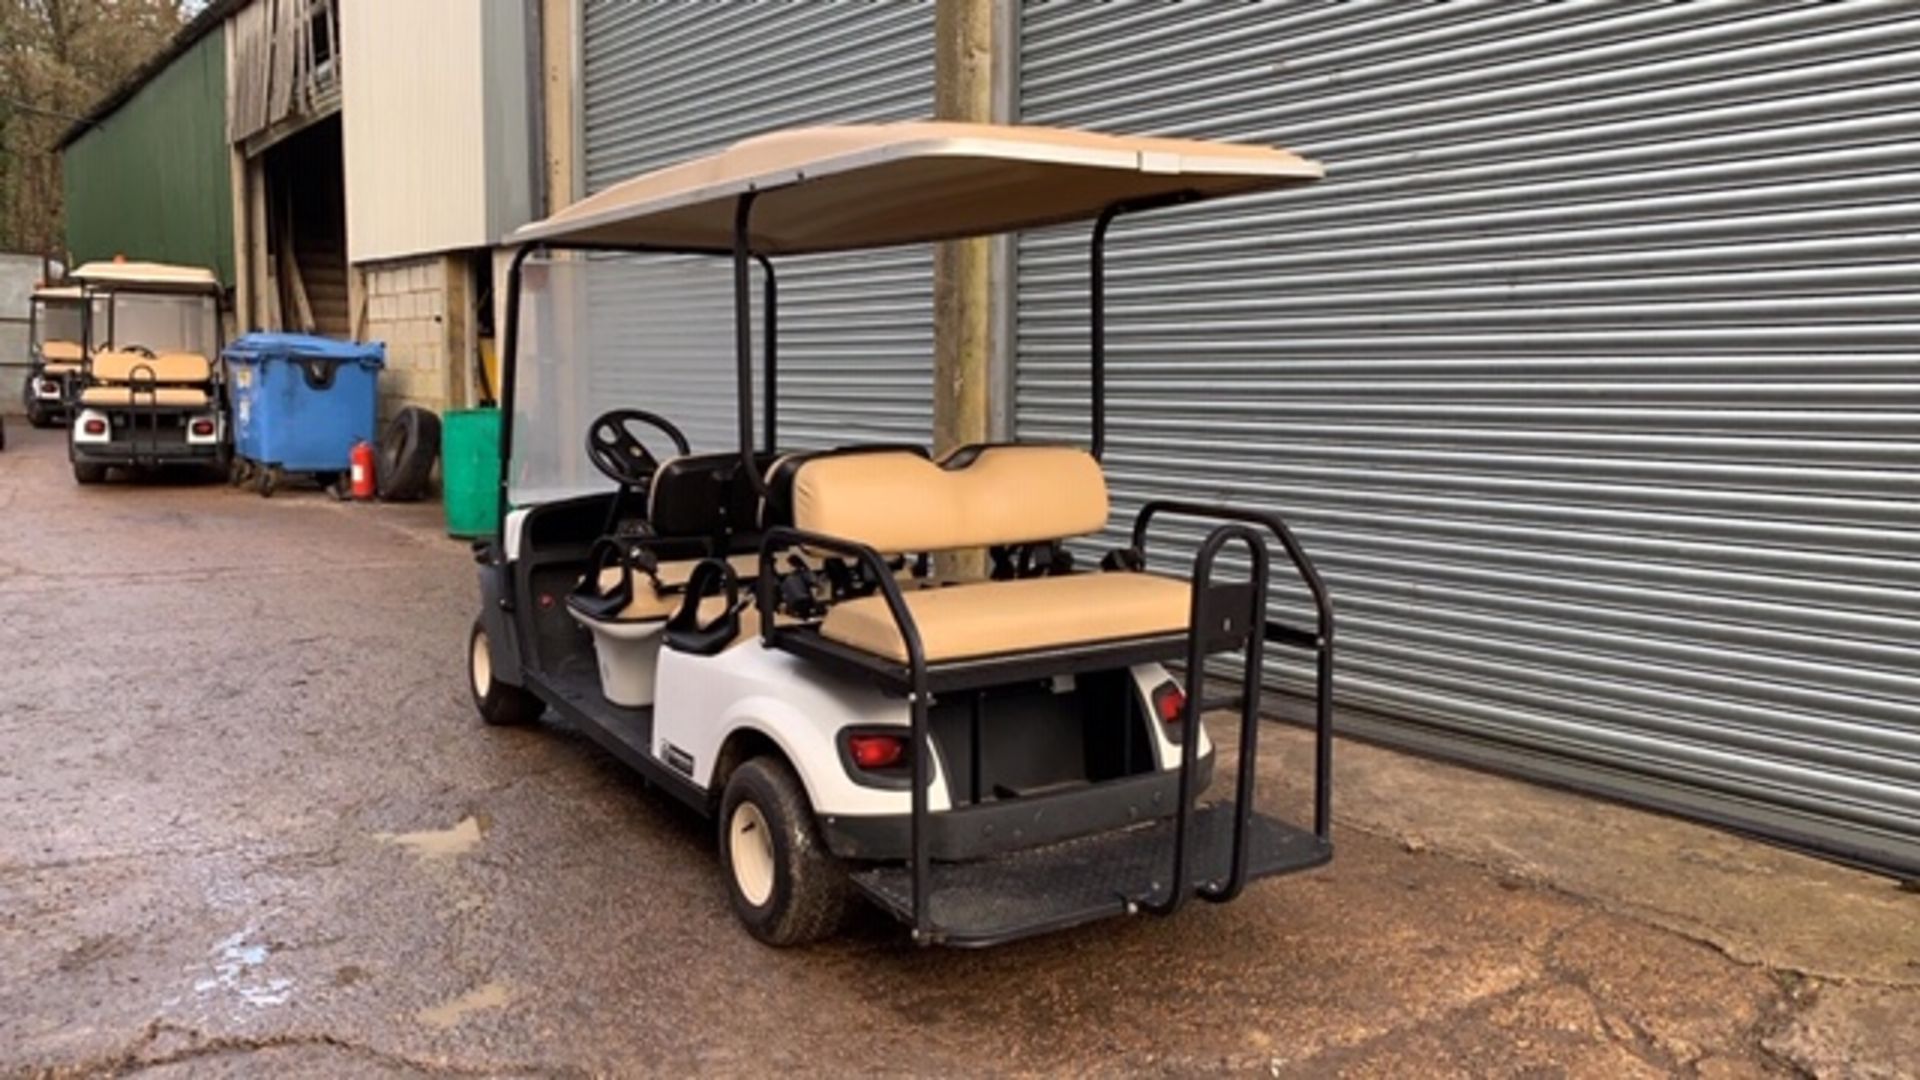 CUSHMAN EZGO SHUTTLE 6 PETROL ENGINED 6 SEATER GOLF / EVENTS BUGGY. YEAR 2017 BUILD. 234 REC HRS. - Image 3 of 5